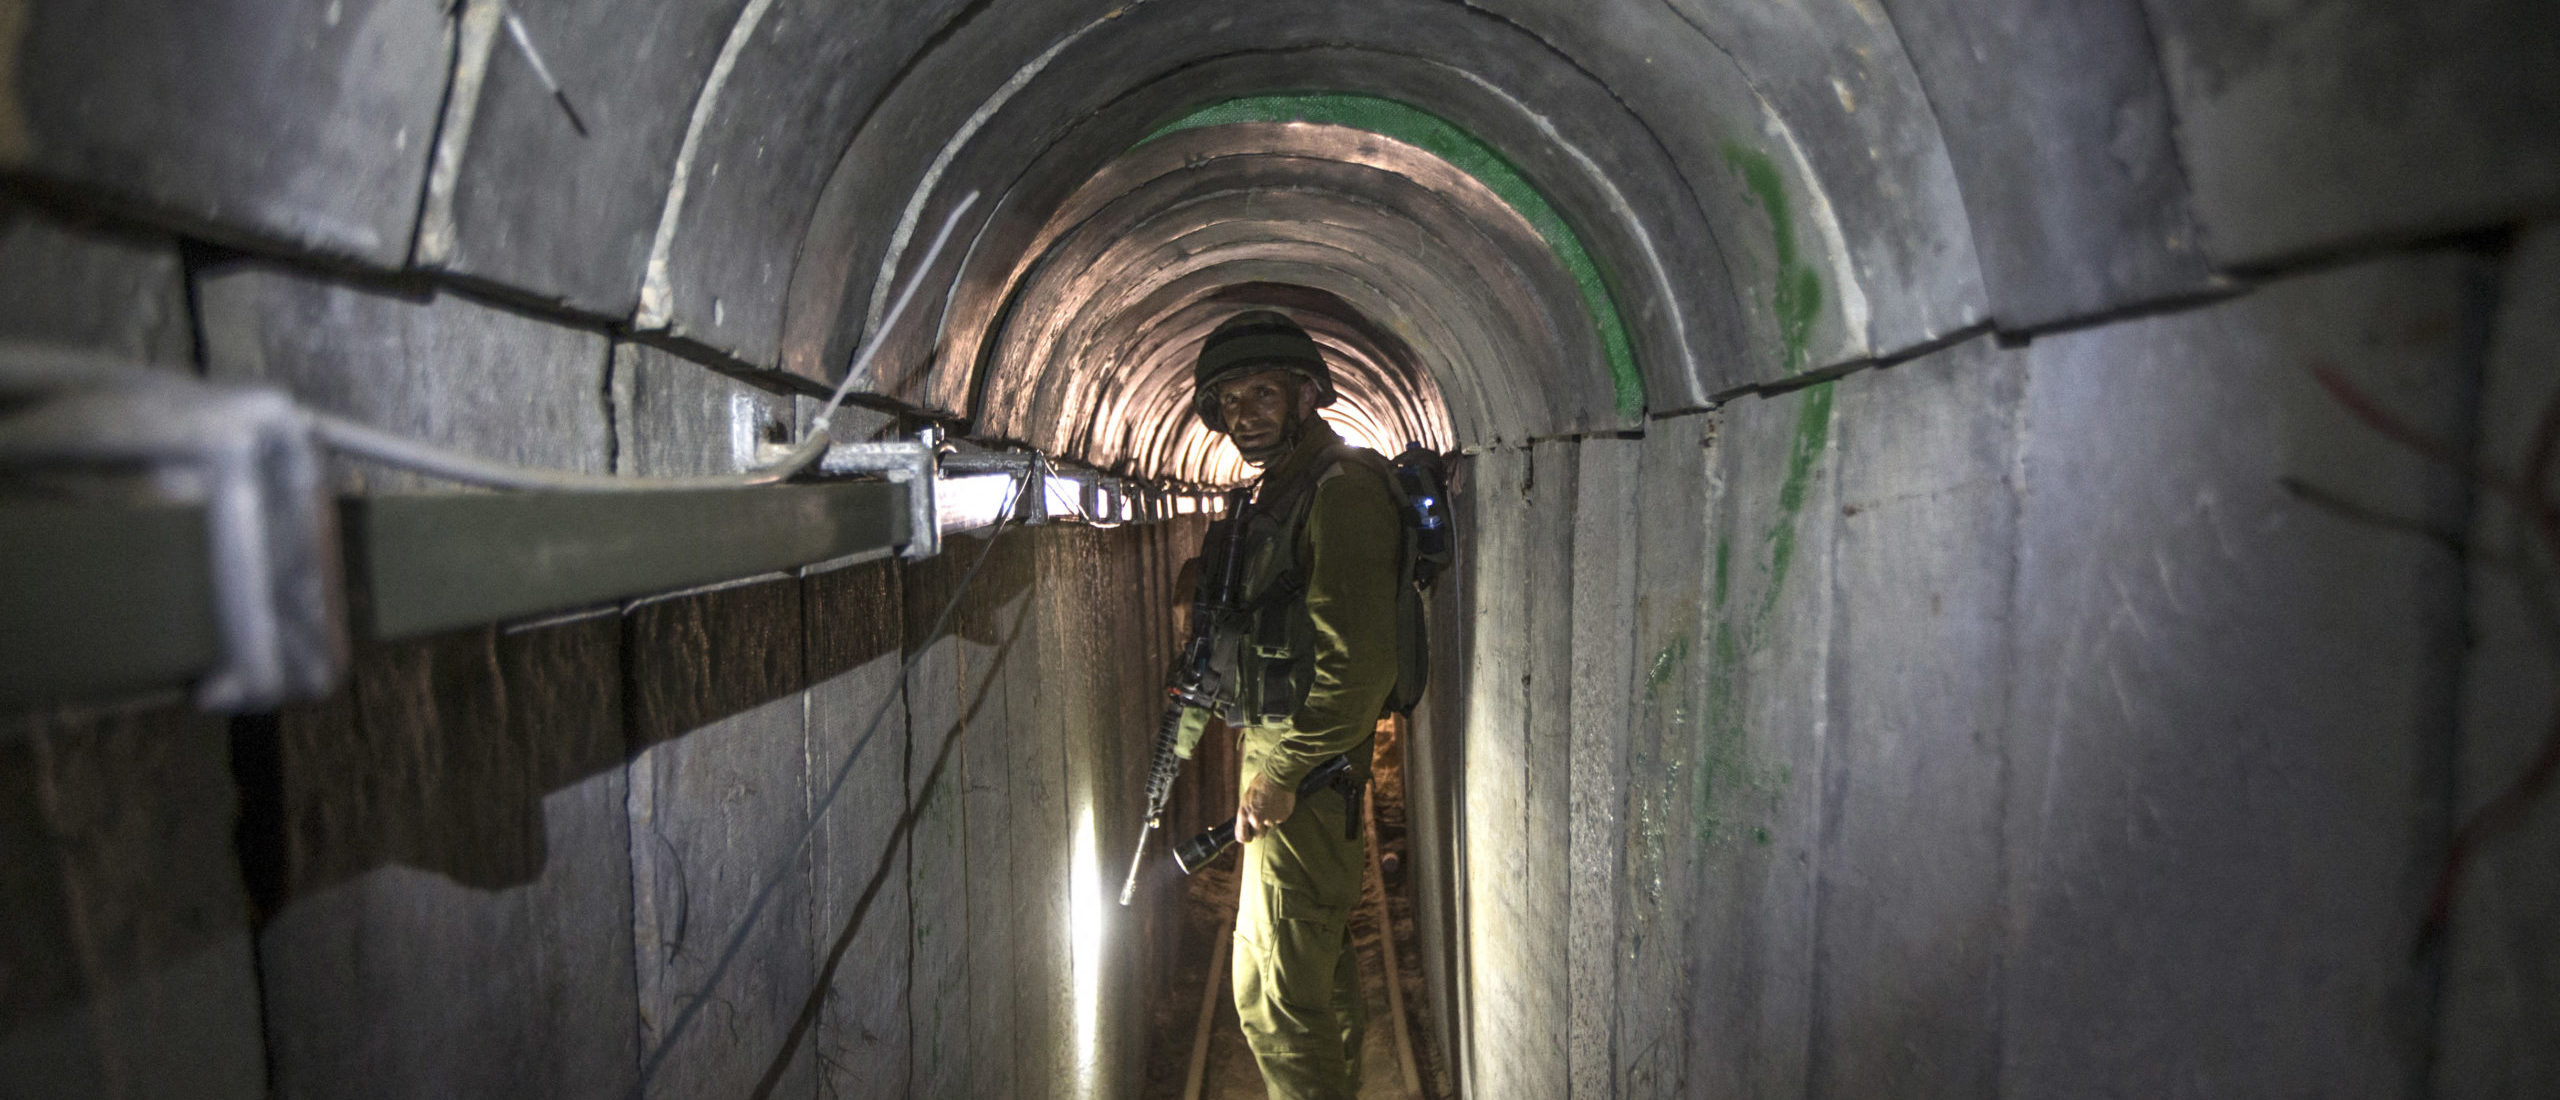 Hamas Tunnel Network Discovered Under UN Agency In Gaza That Fired Staffers Over Alleged Terror Links, IDF Says